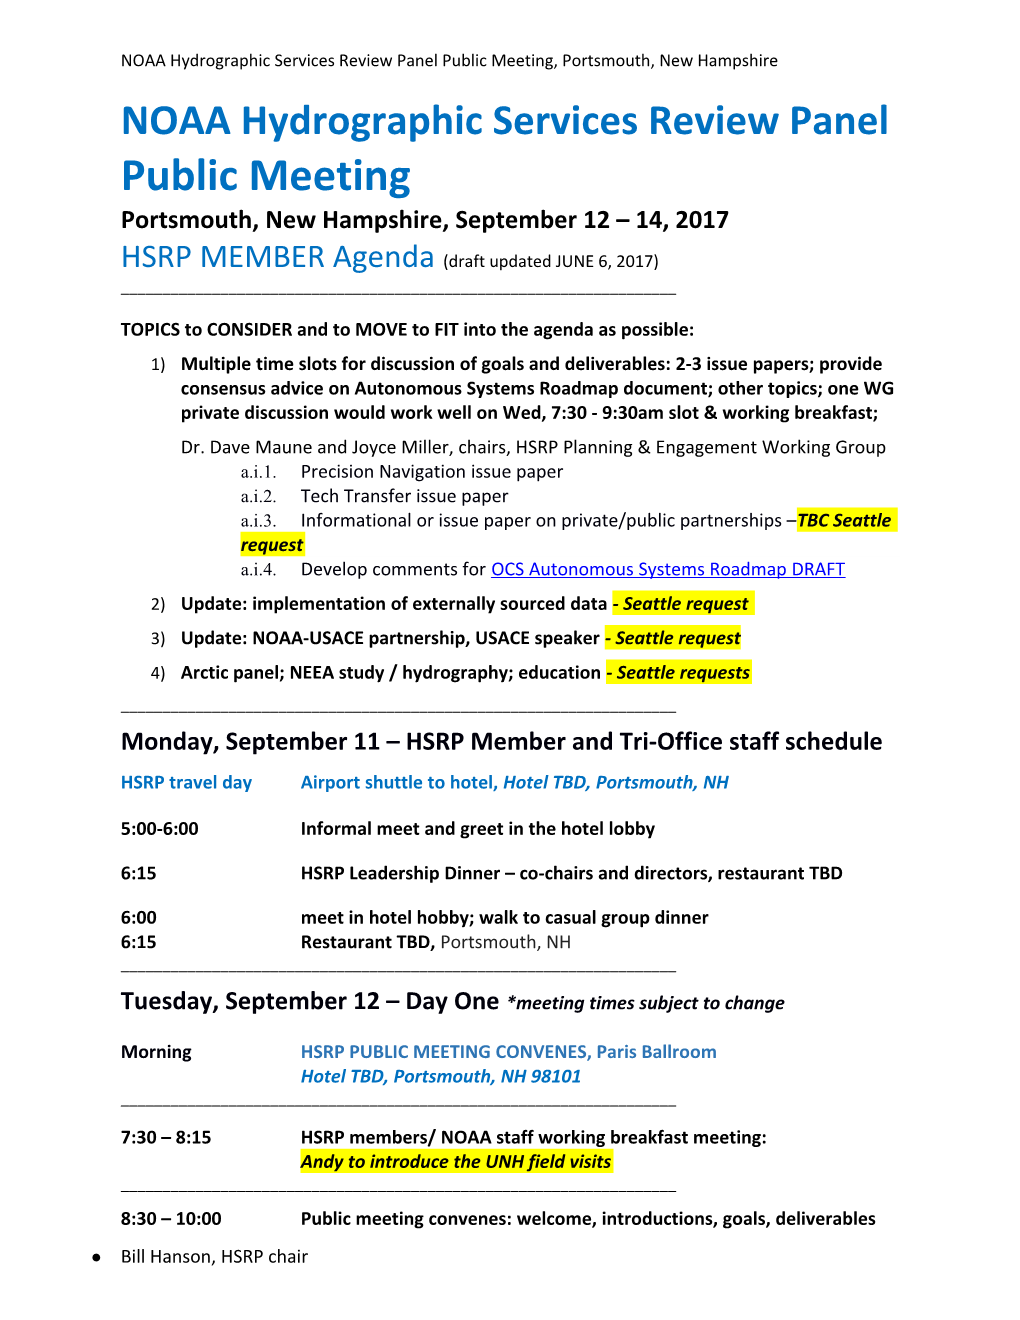 NOAA Hydrographic Services Review Panel Public Meeting, Portsmouth, NH